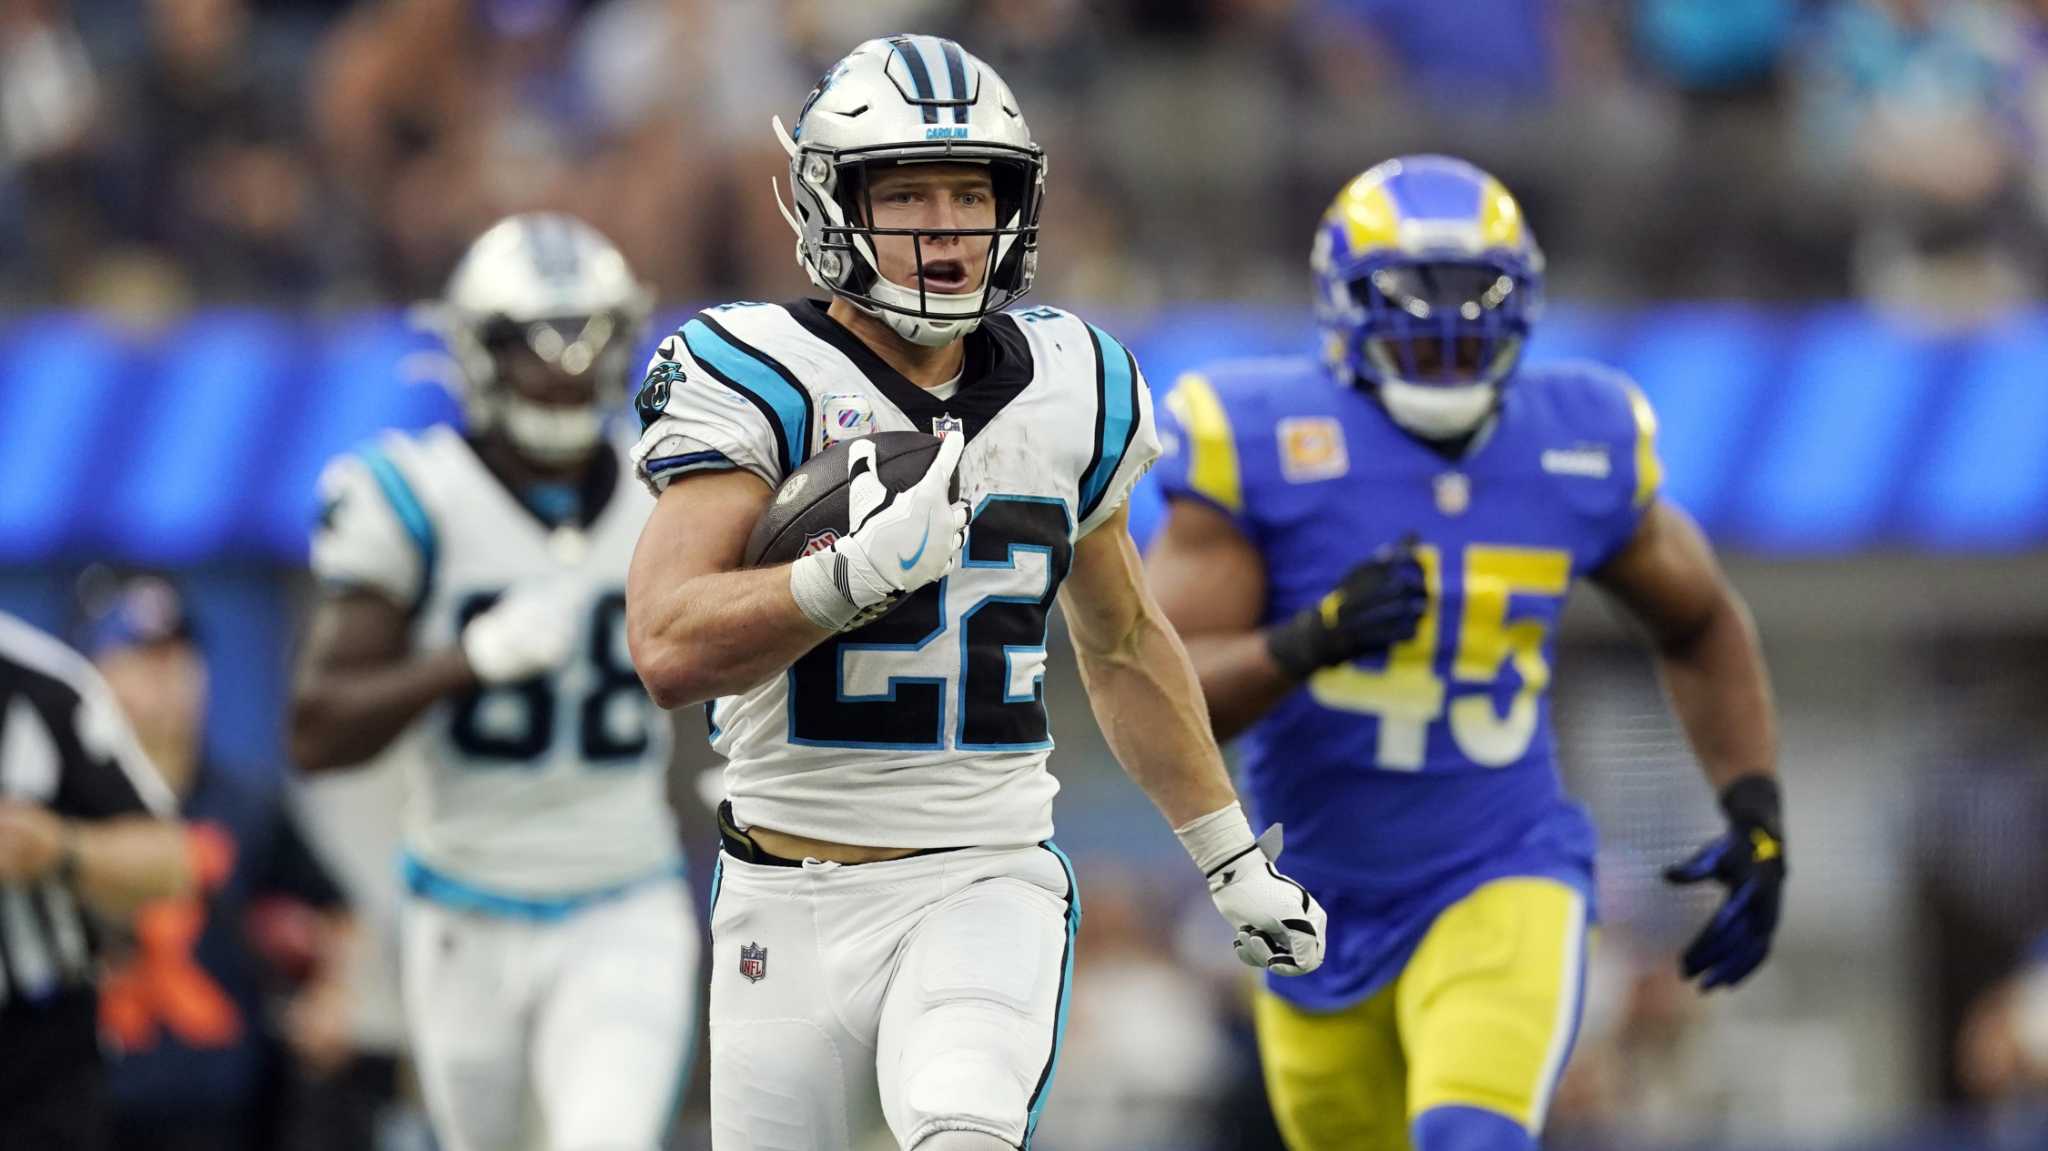 49ers injury news: Christian McCaffrey is not listed on the injury